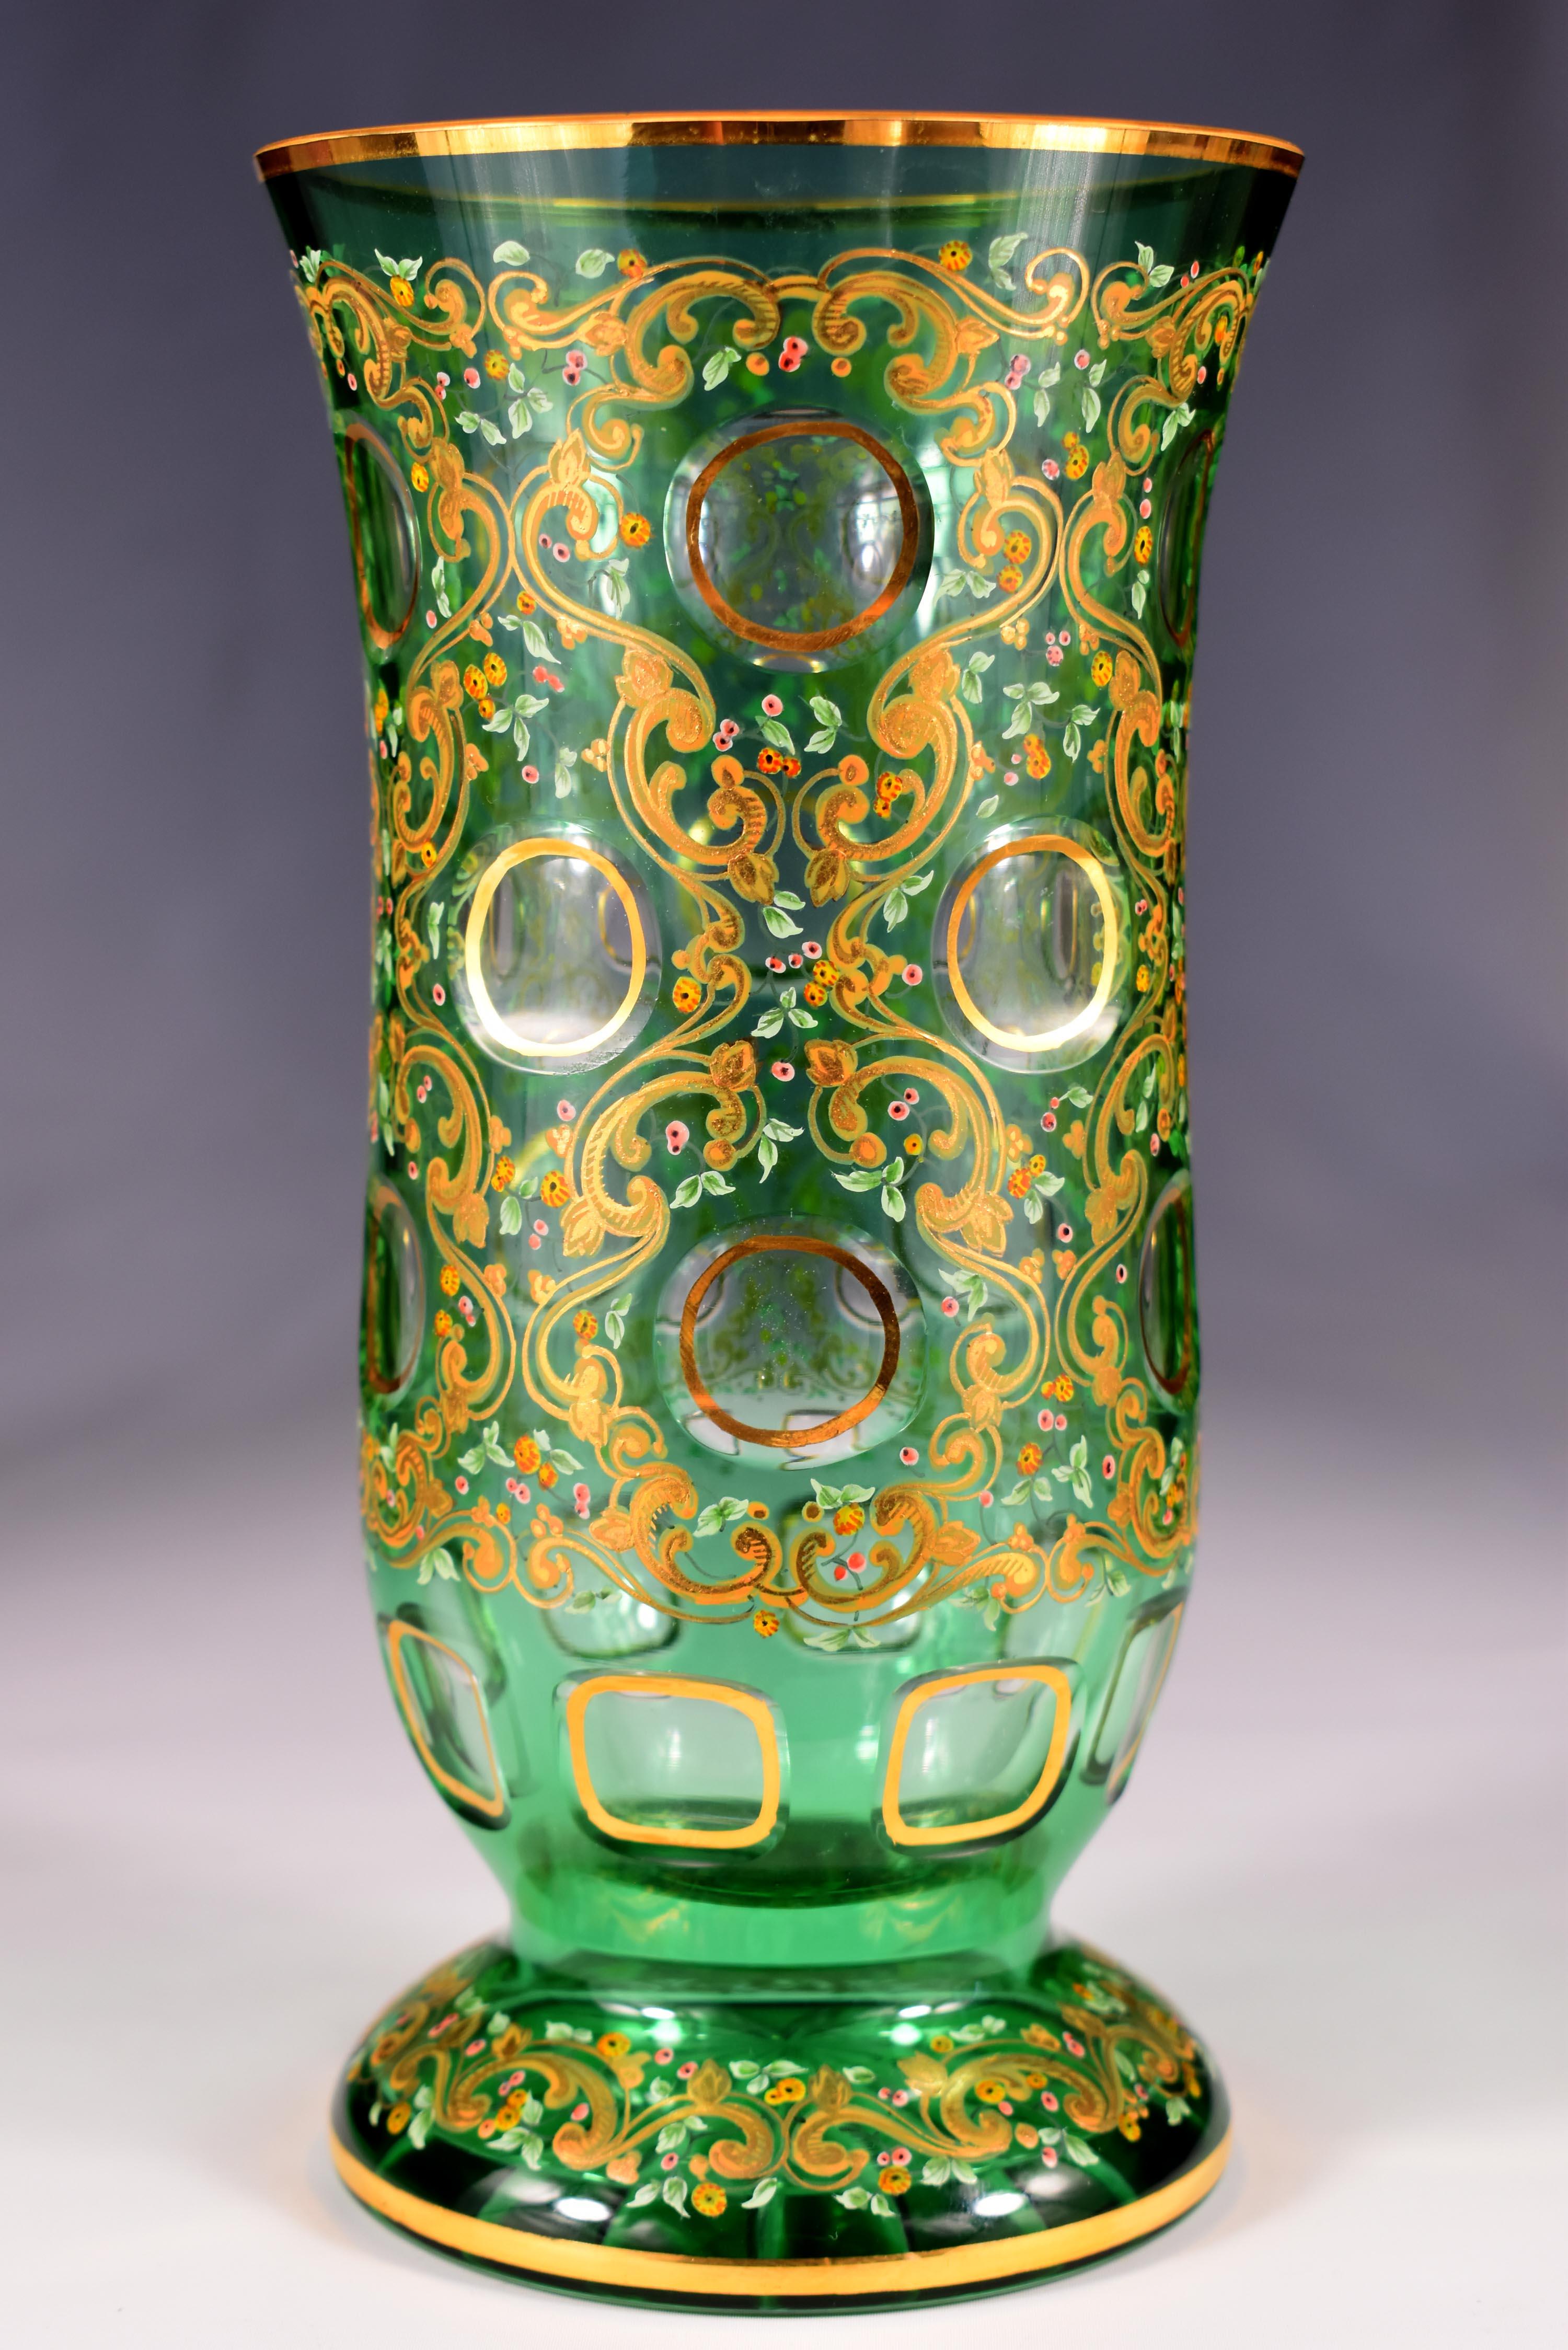 Hand-Crafted Painted Vase - Overlay Green Glass - 20th Century Bohemian Glass For Sale